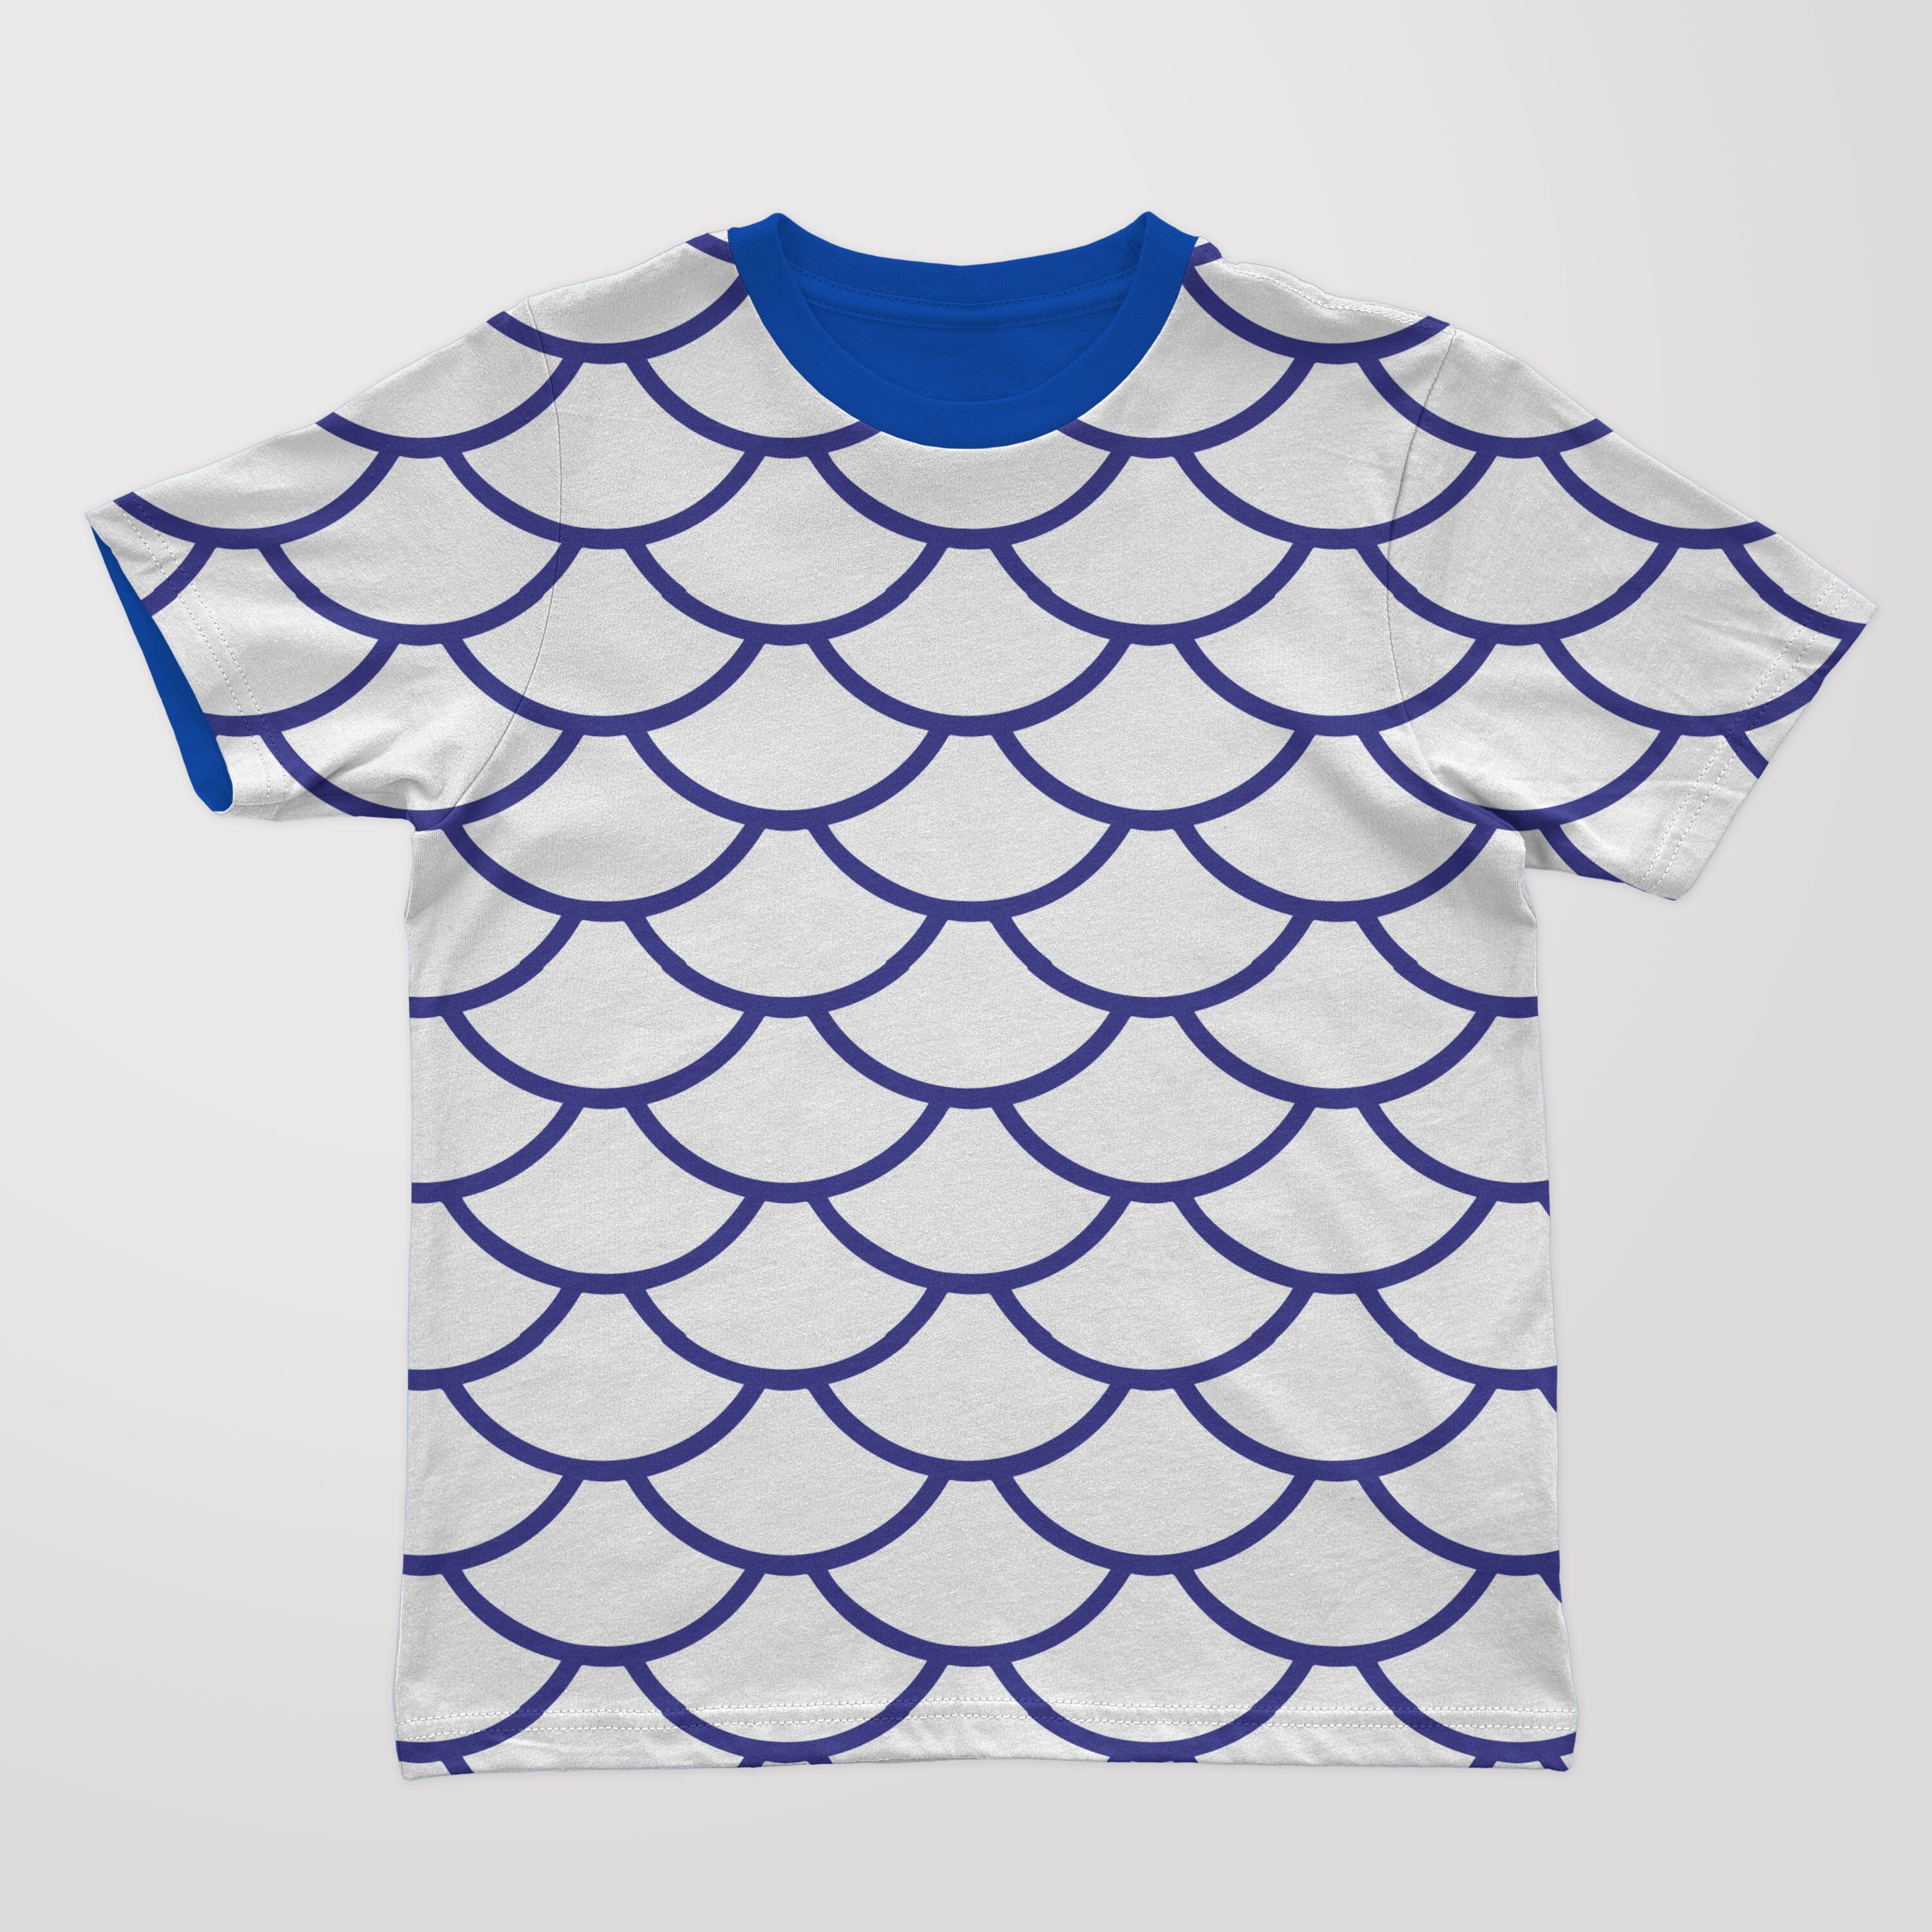 Creative blue scales for your t-shirt.